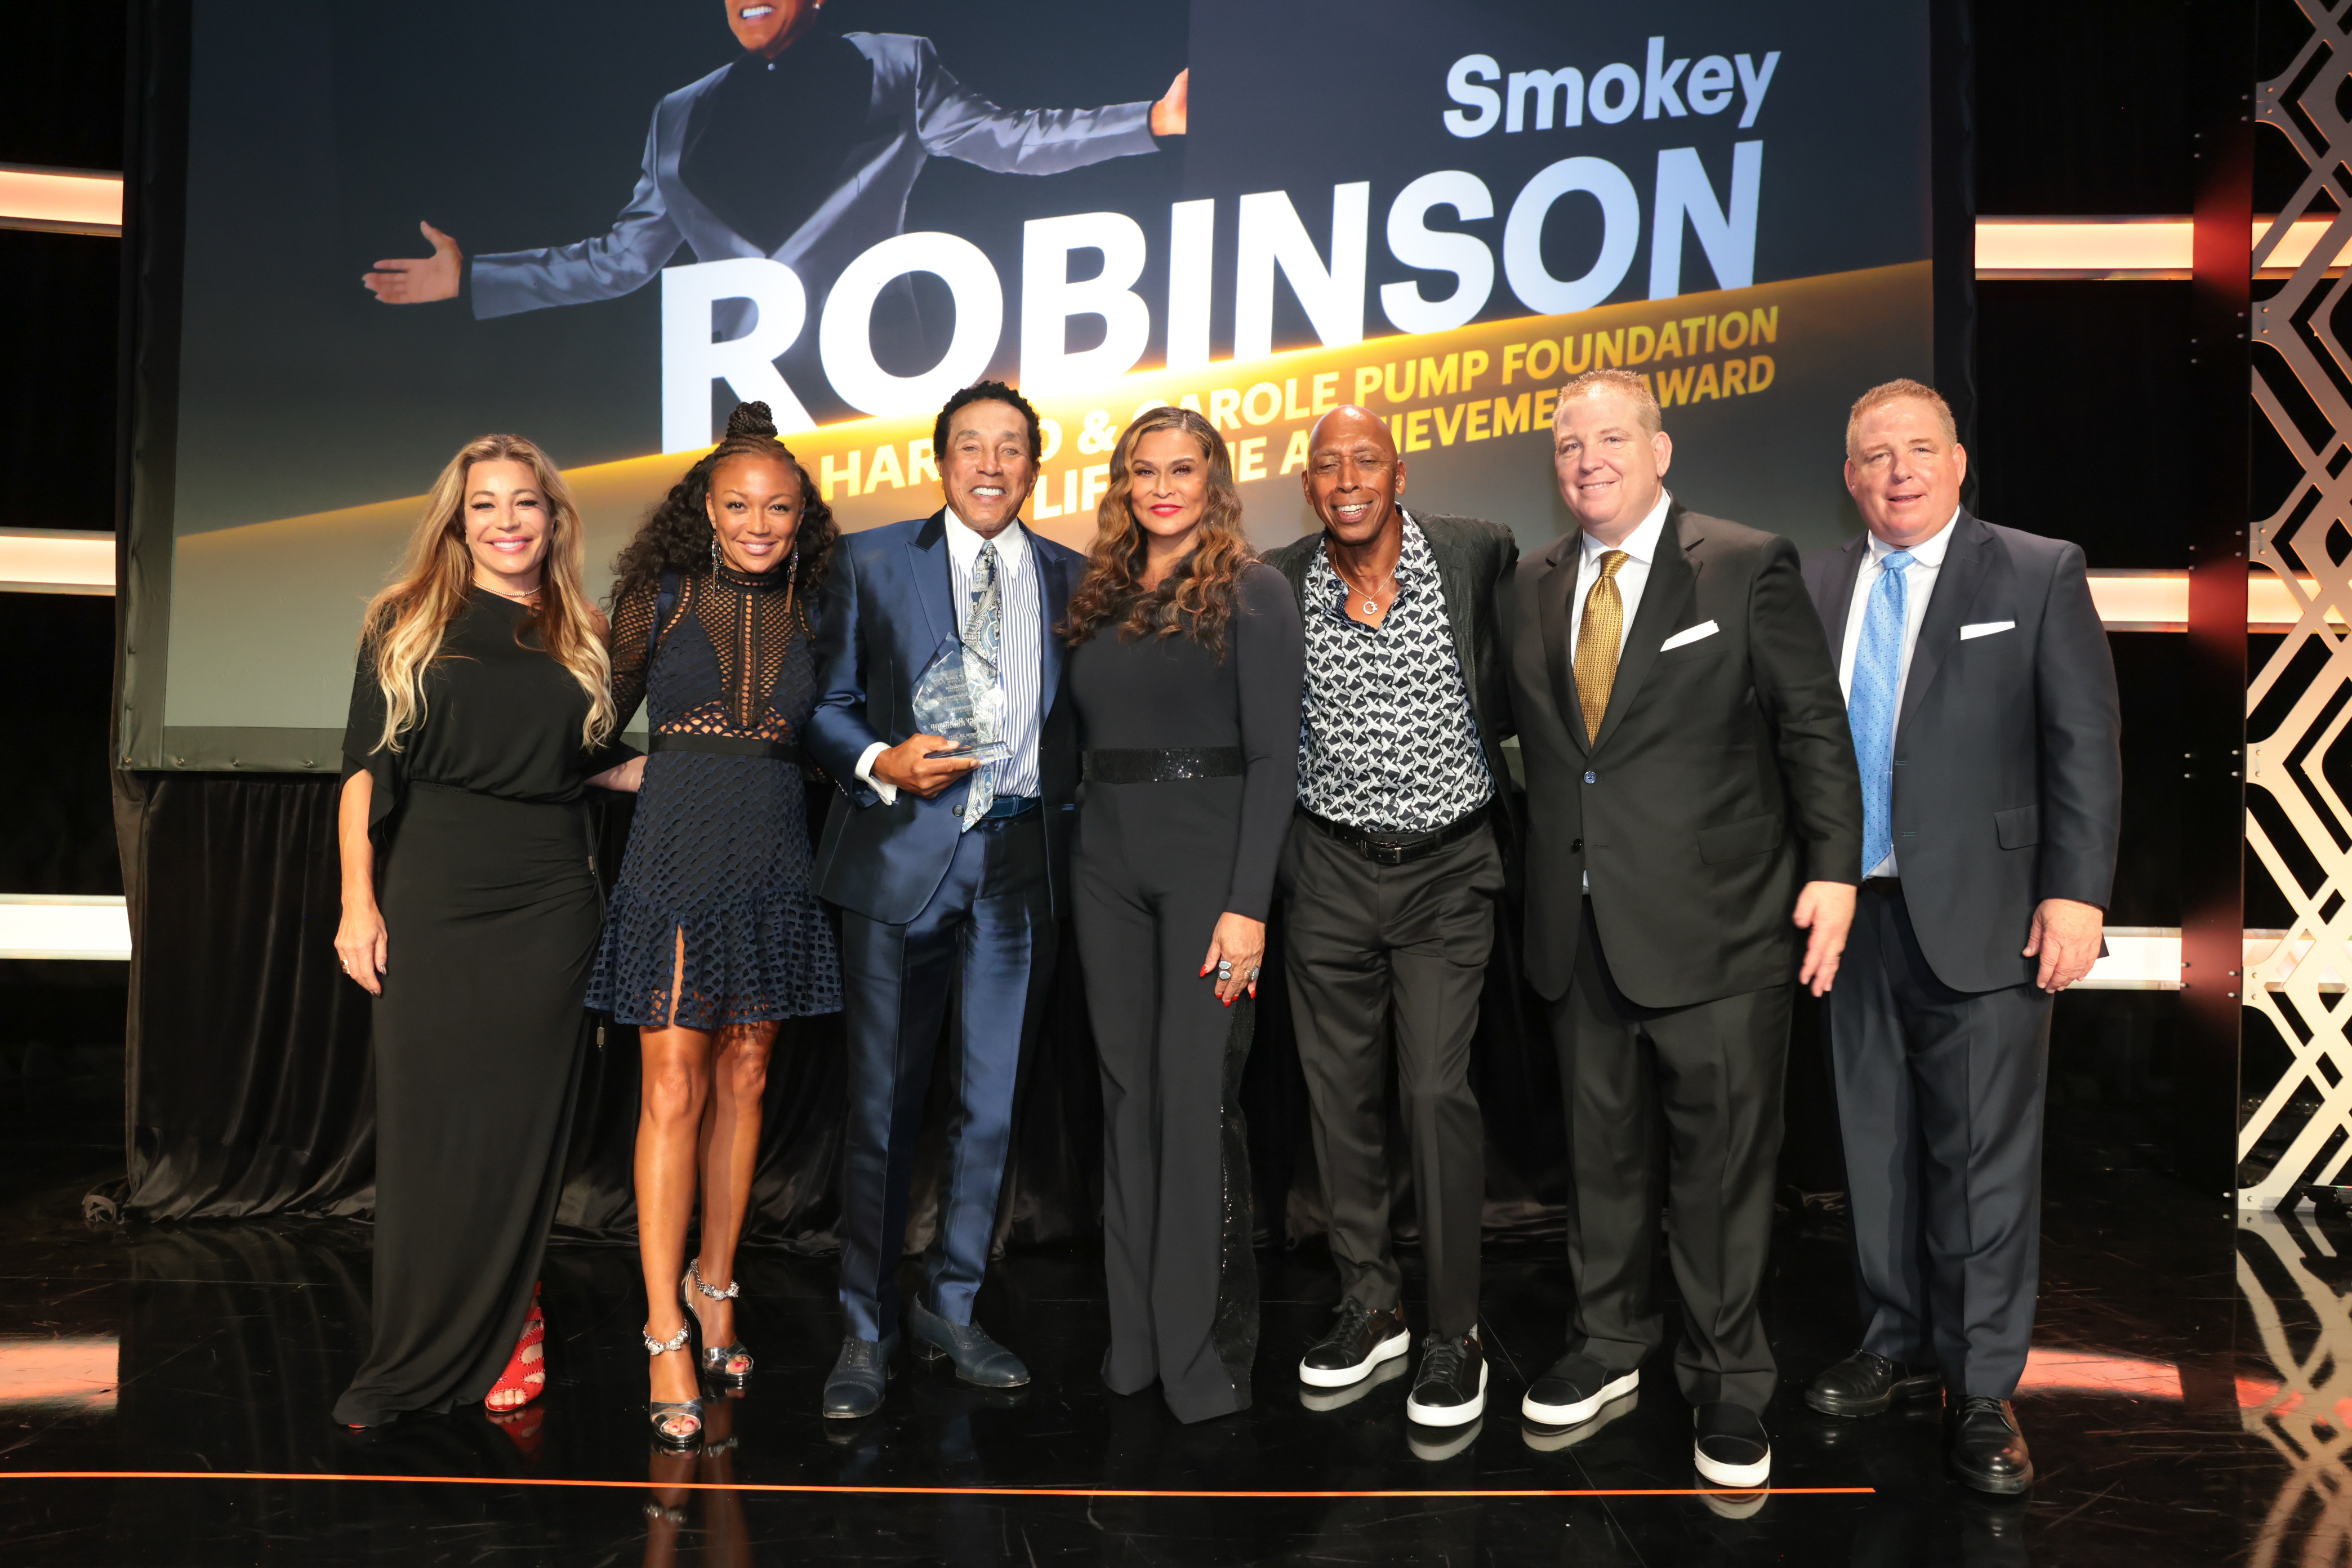 Smokey Robinson on stage with group